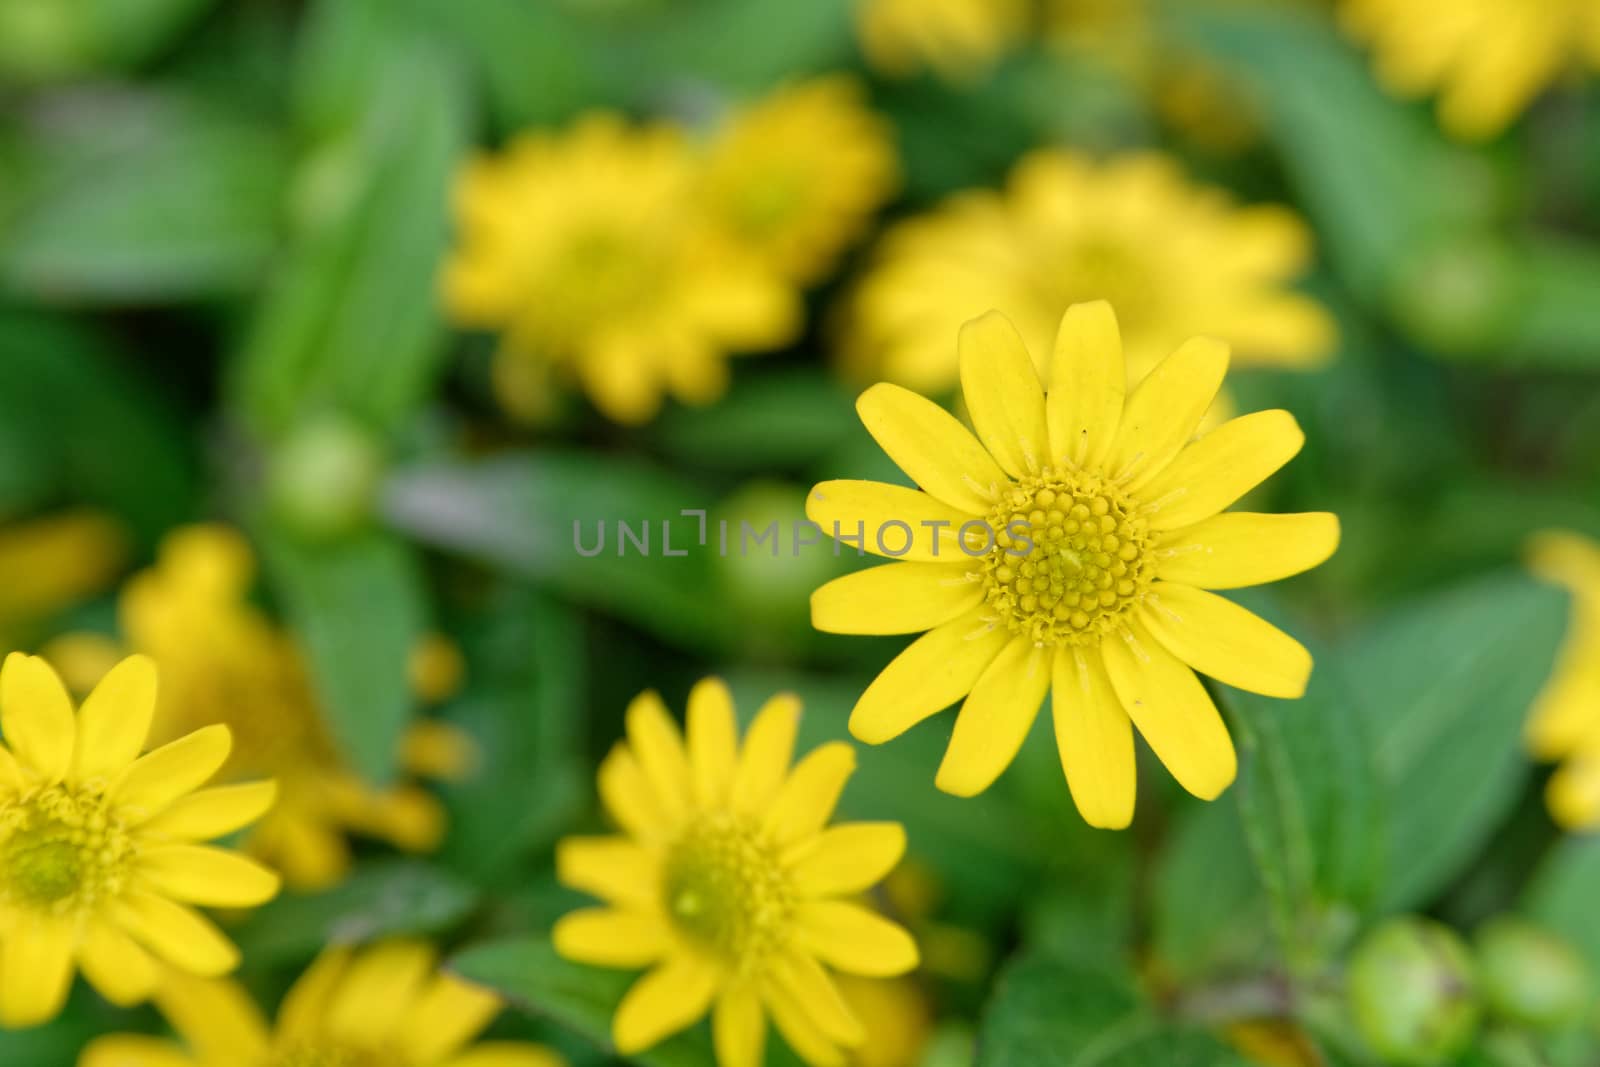 Yellow blossoms on the nice blurred background.